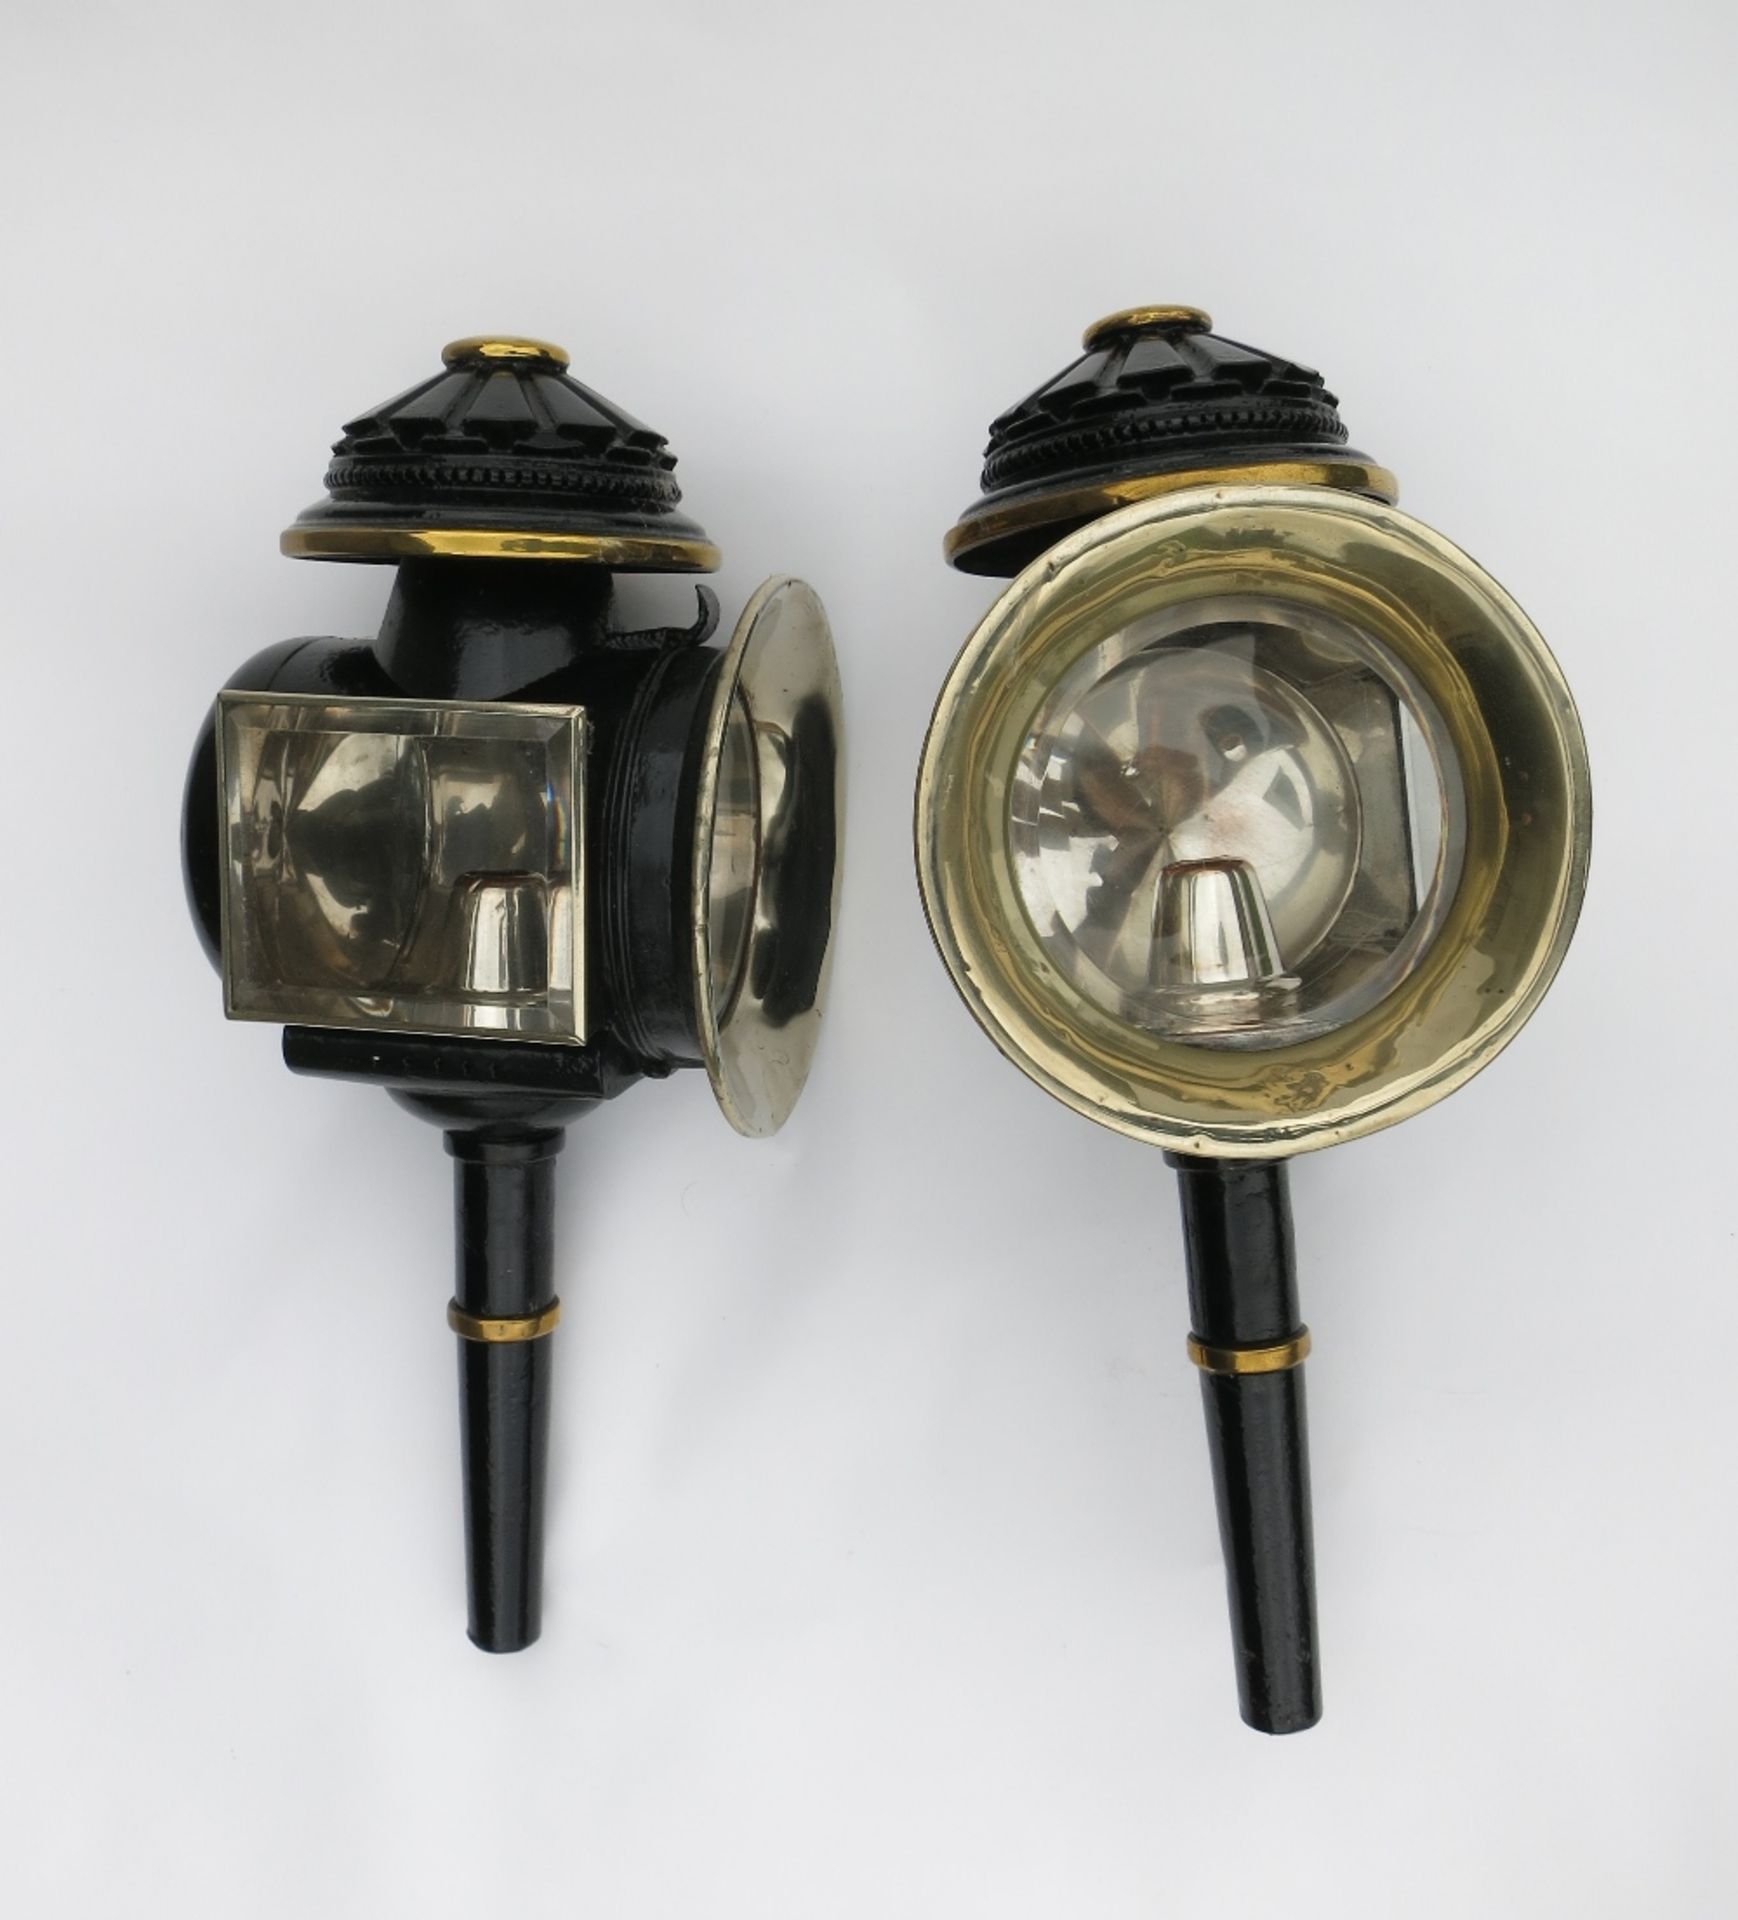 Pair of black/brass Brake lamps with round fronts and pie crust tops. Measuring 21ins long x 8½ins